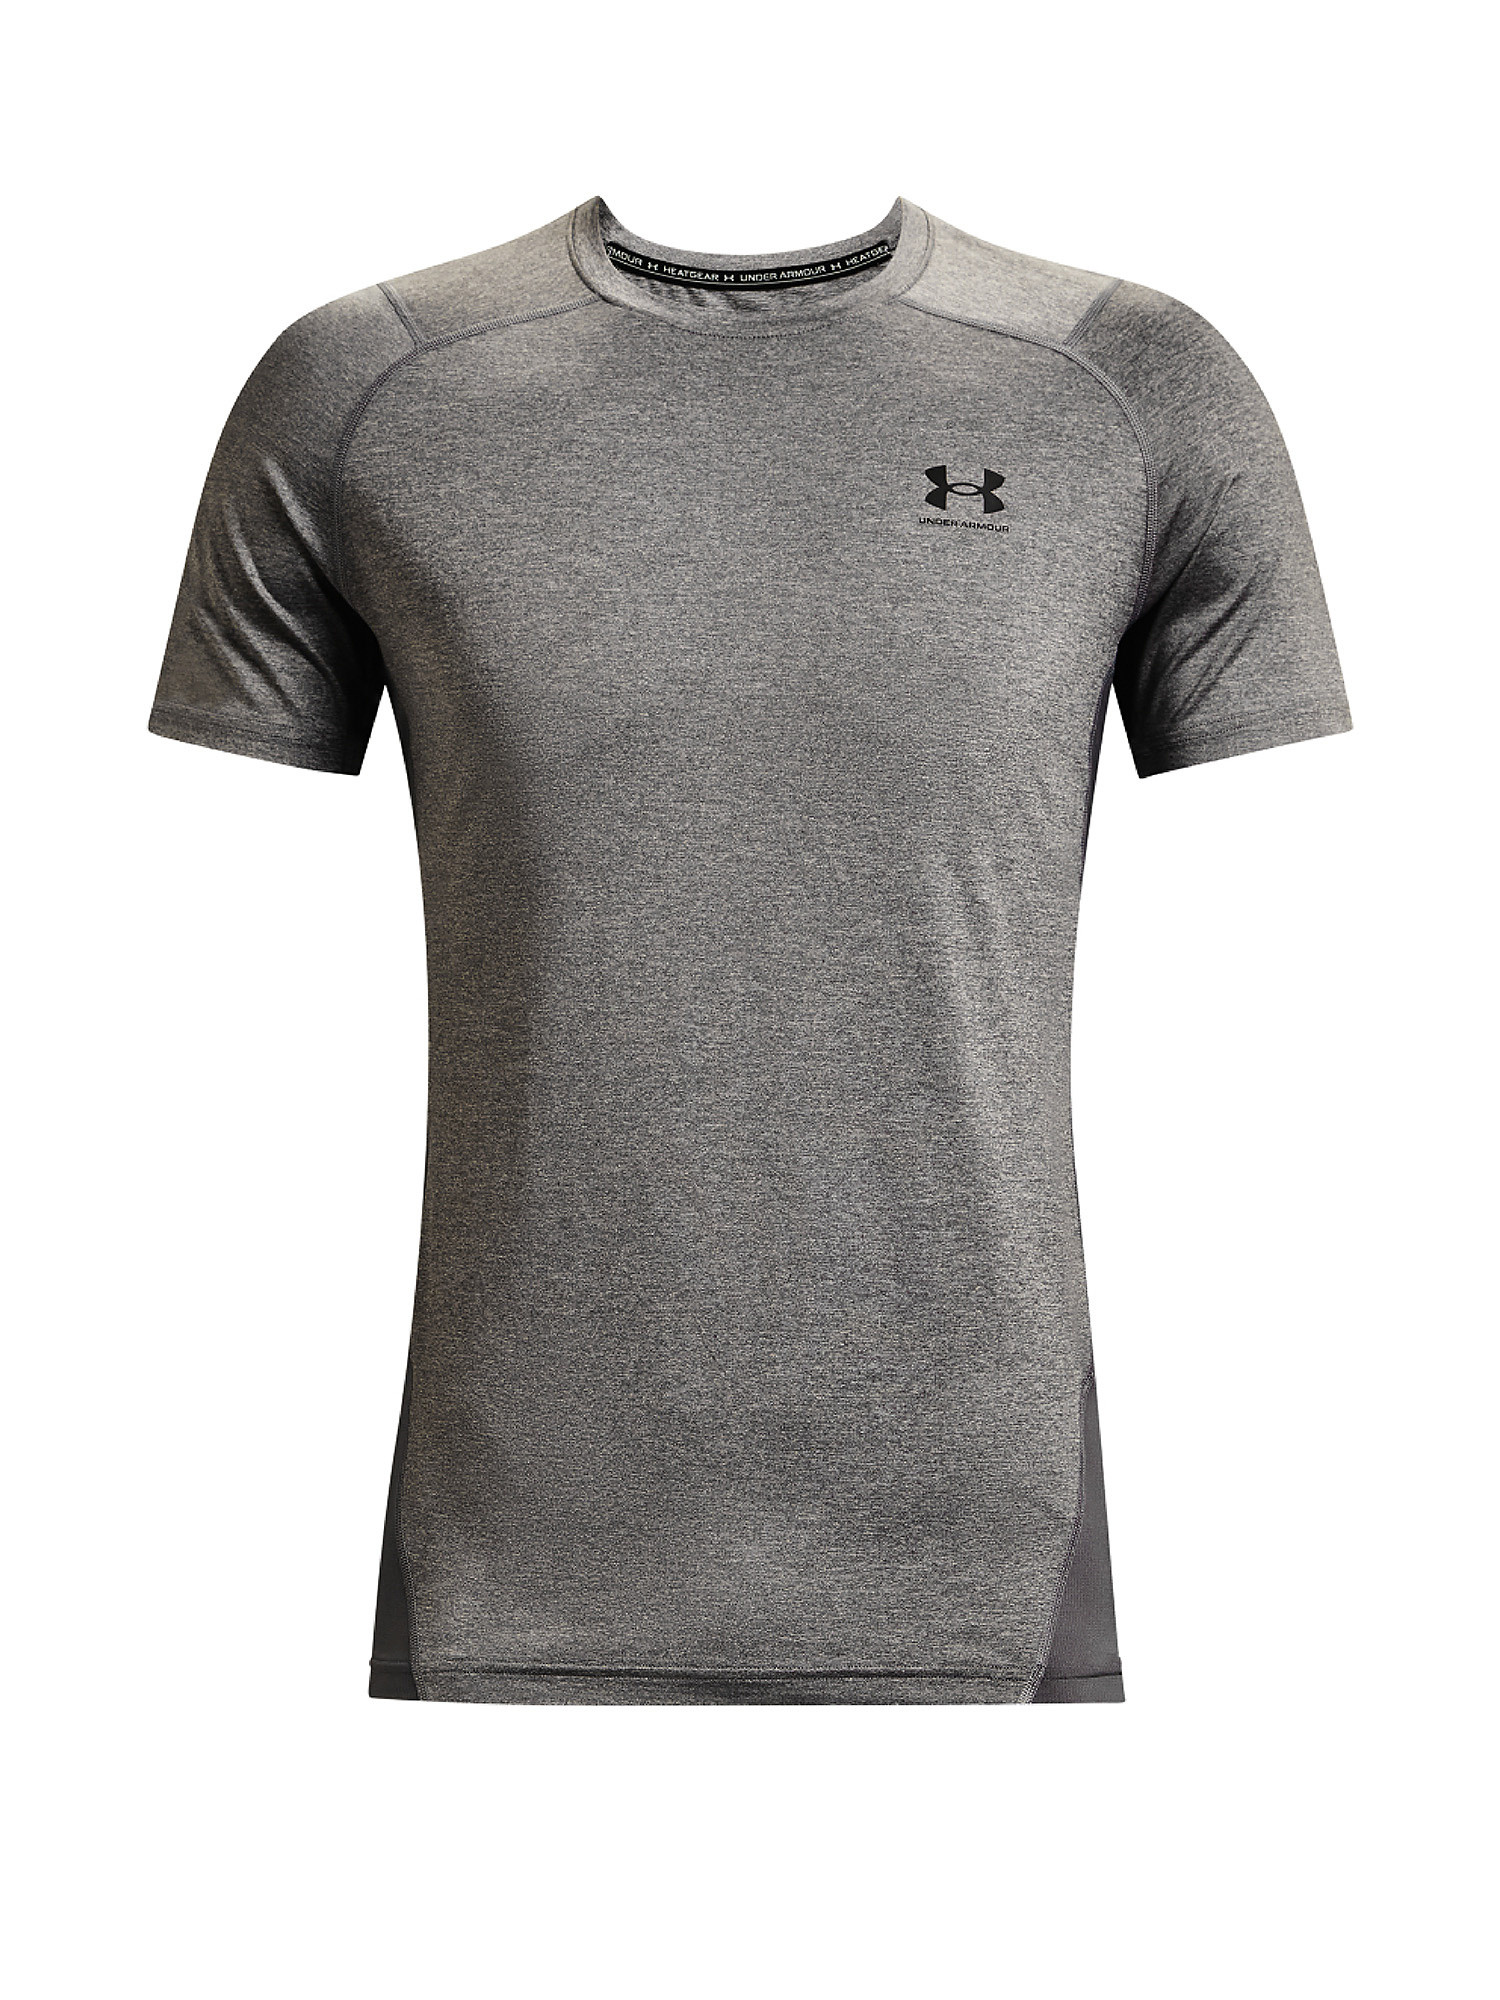 Under Armour - HeatGear® Armor Fitted Short Sleeve Shirt, Grey, large image number 0